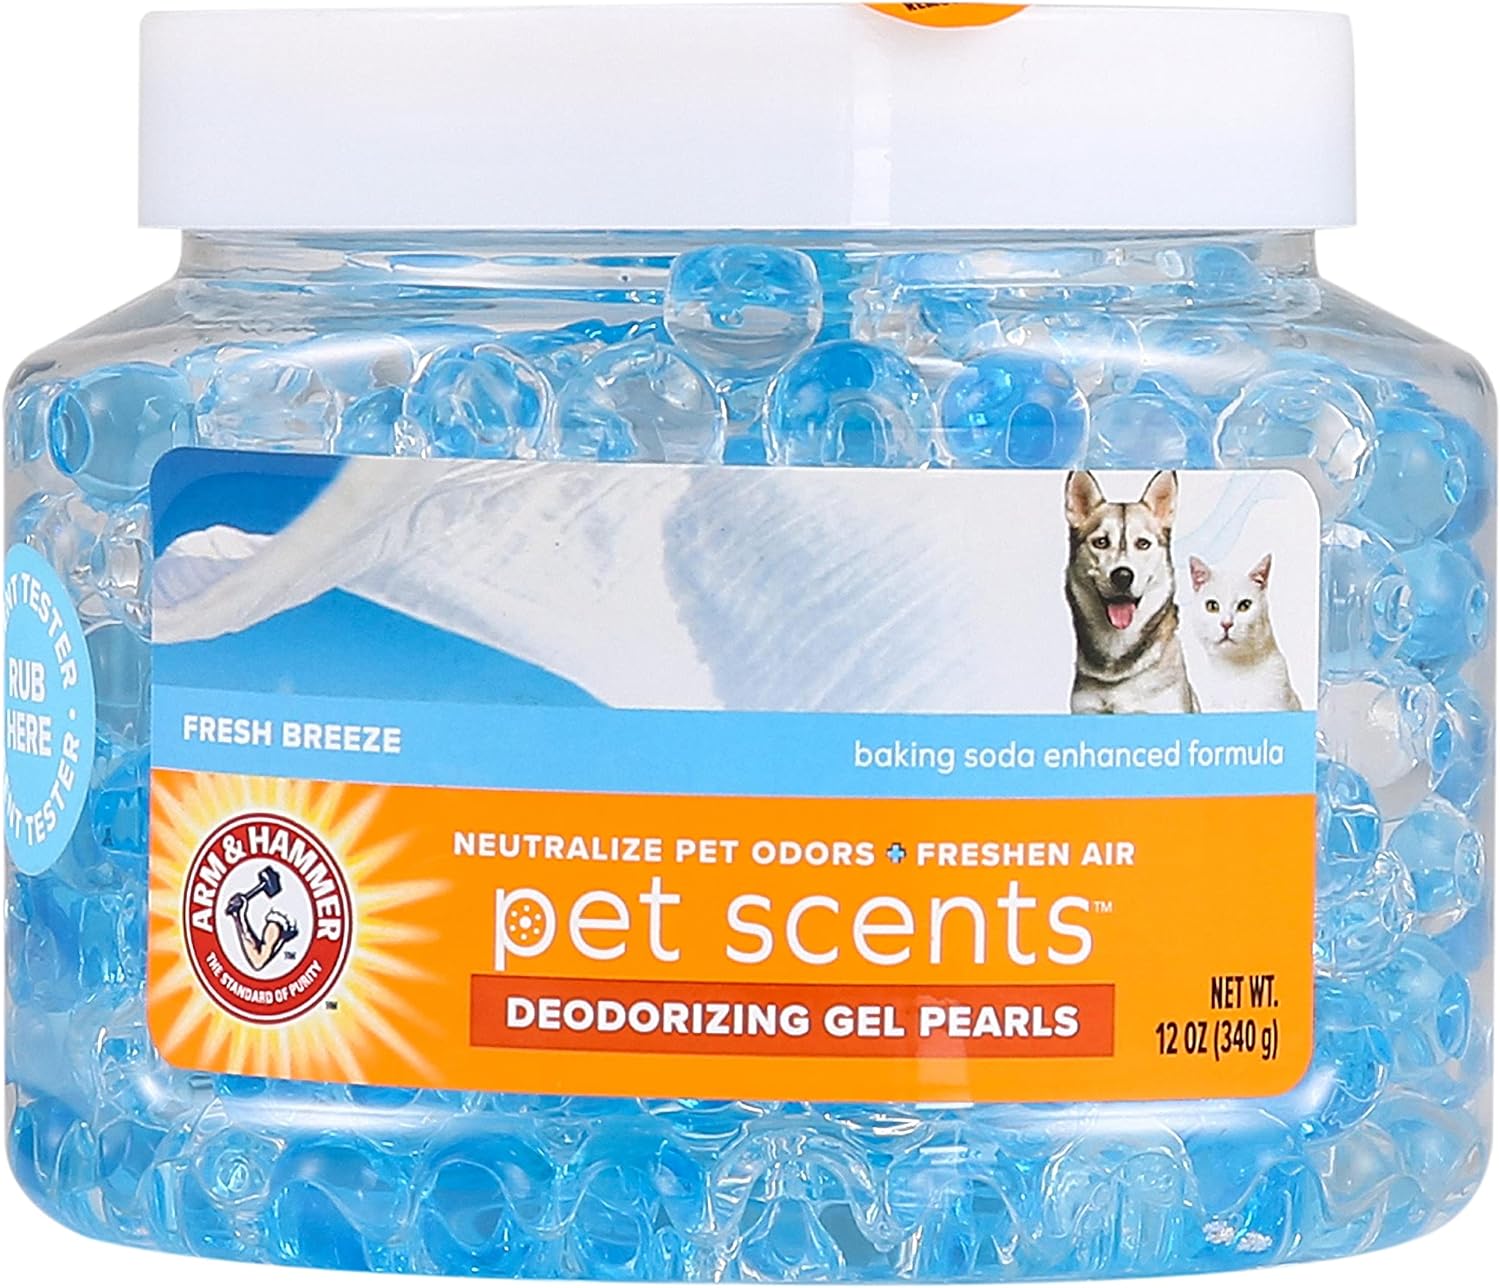 Arm & Hammer for Pets Air Care Pet Scents Deodorizing Gel Beads in Fresh Breeze